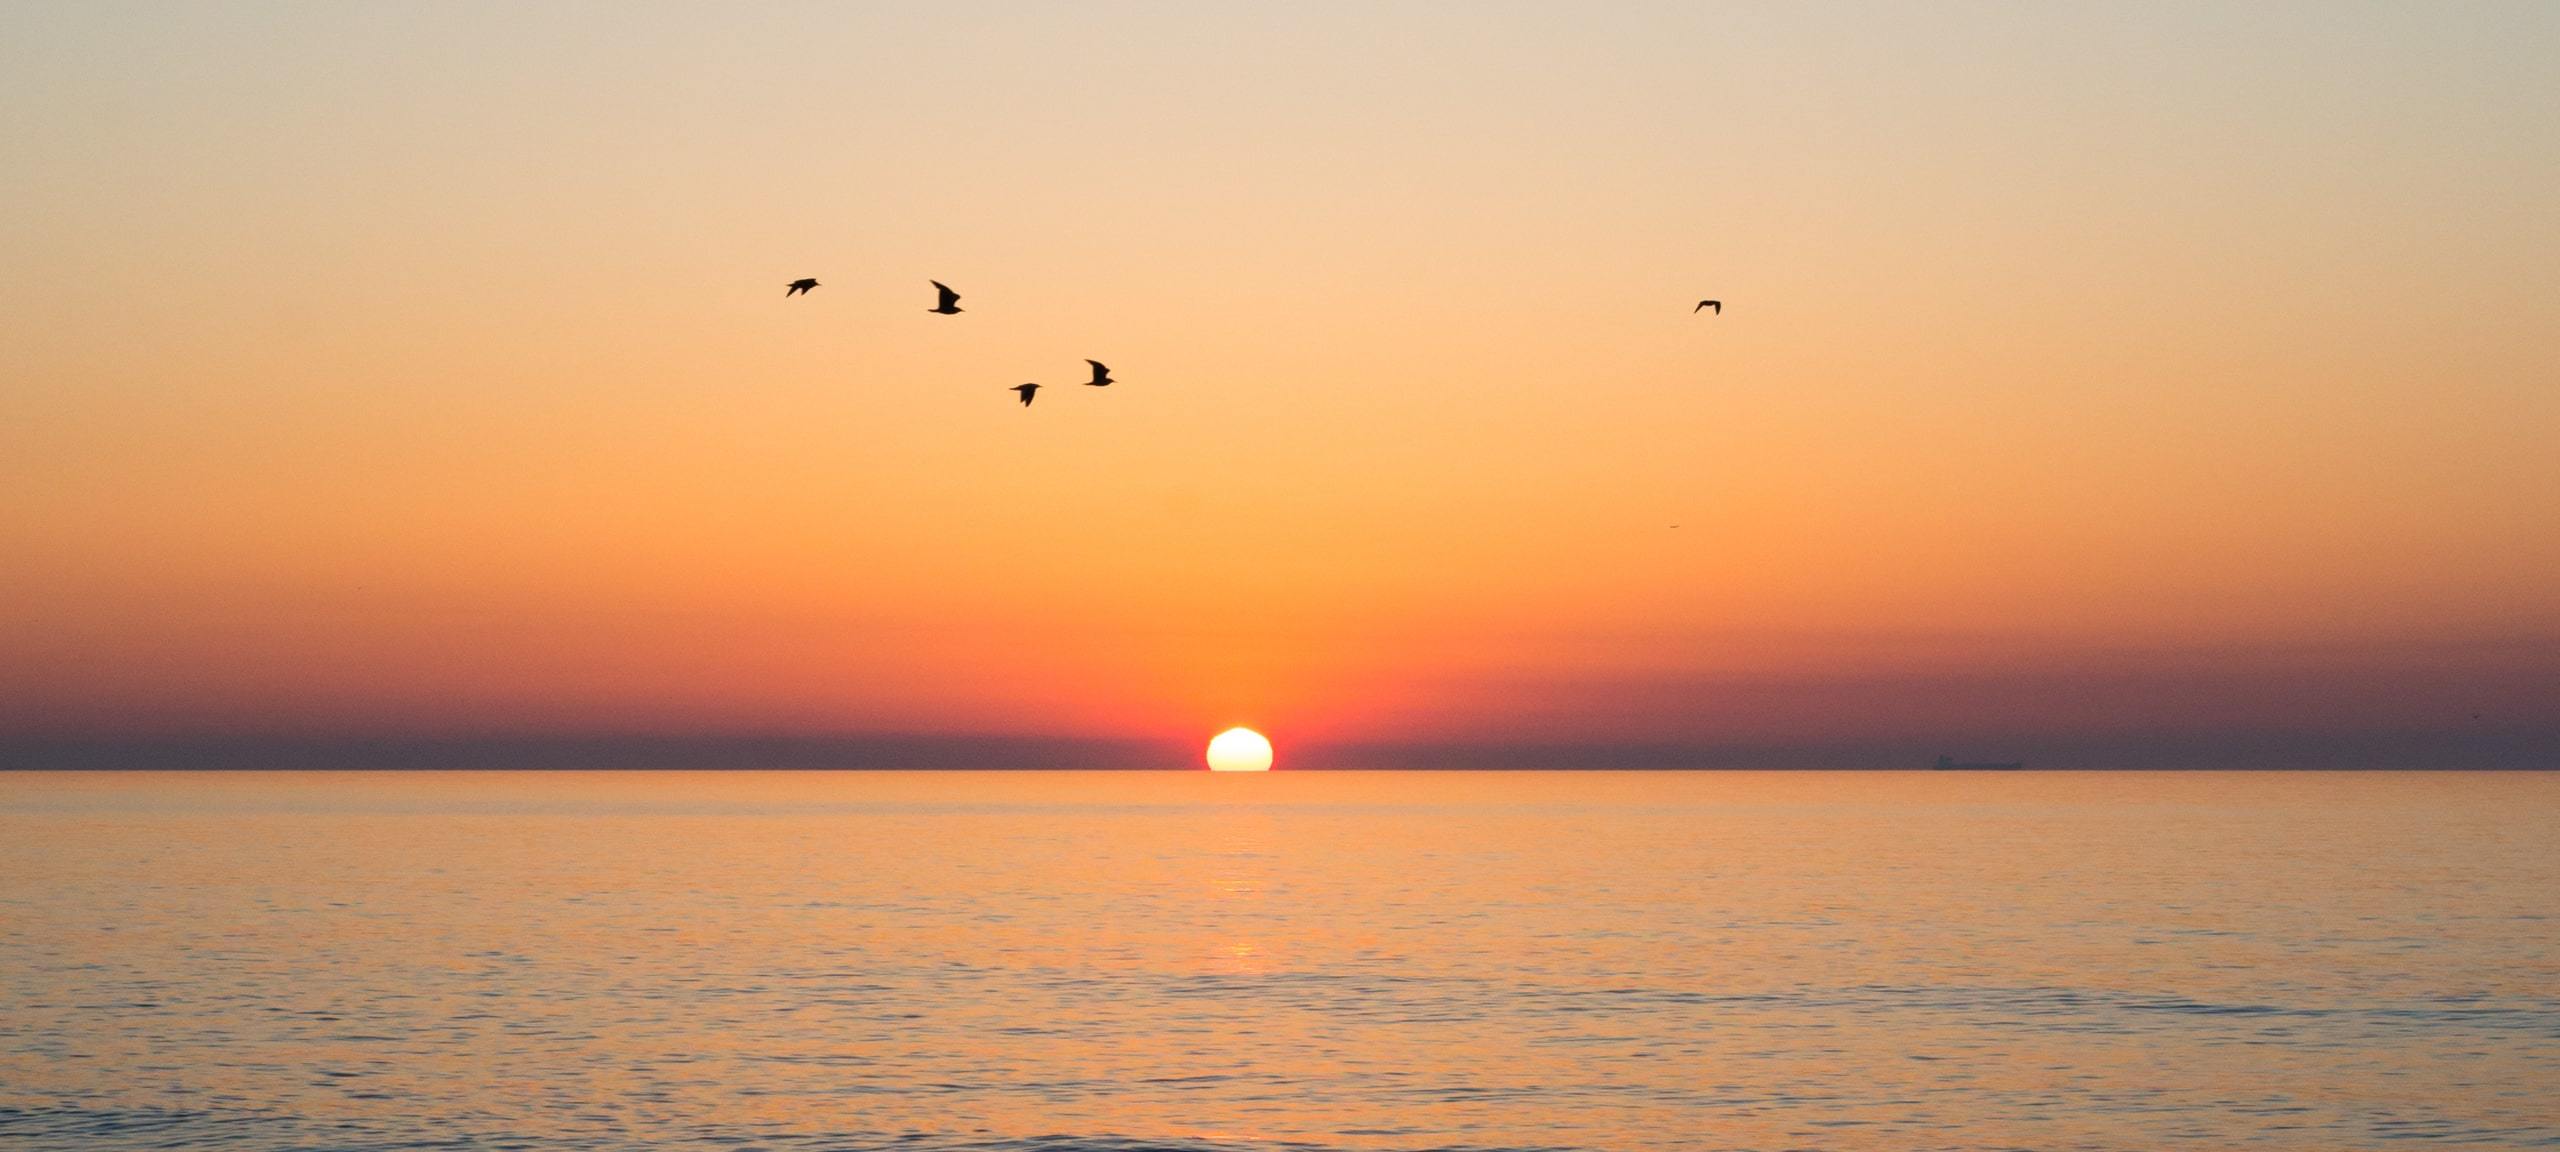 Birds flying over Jersey Shore sunset at Monmouth Beach